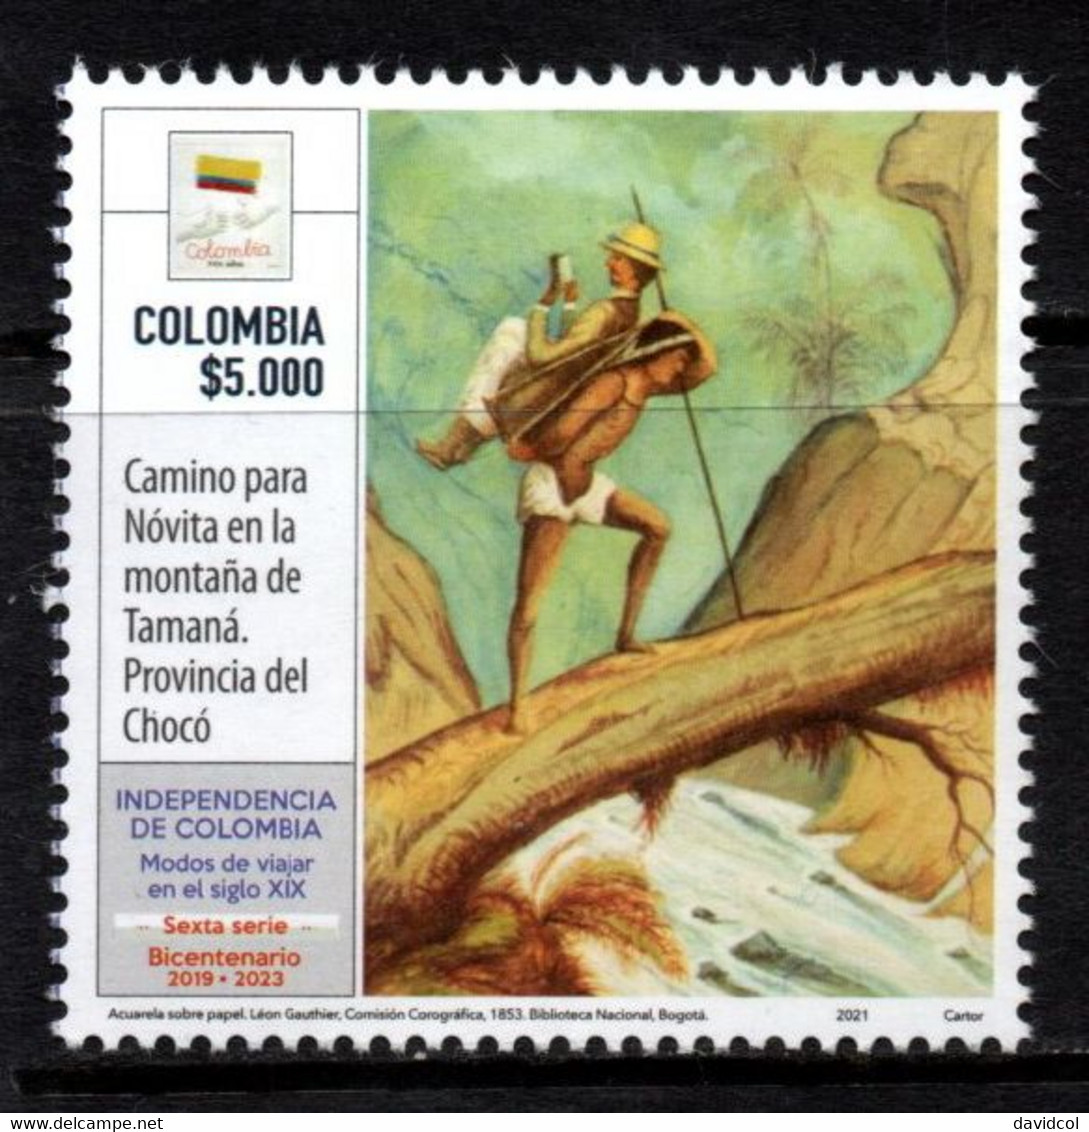 A942E - KOLUMBIEN - 2021- MNH-NOVITA, CHOCO PROVINCE- INDEPENDENCE 6TH ISSUE - WAYS OF TRAVELING IN THE XIX CENTURY - Colombia